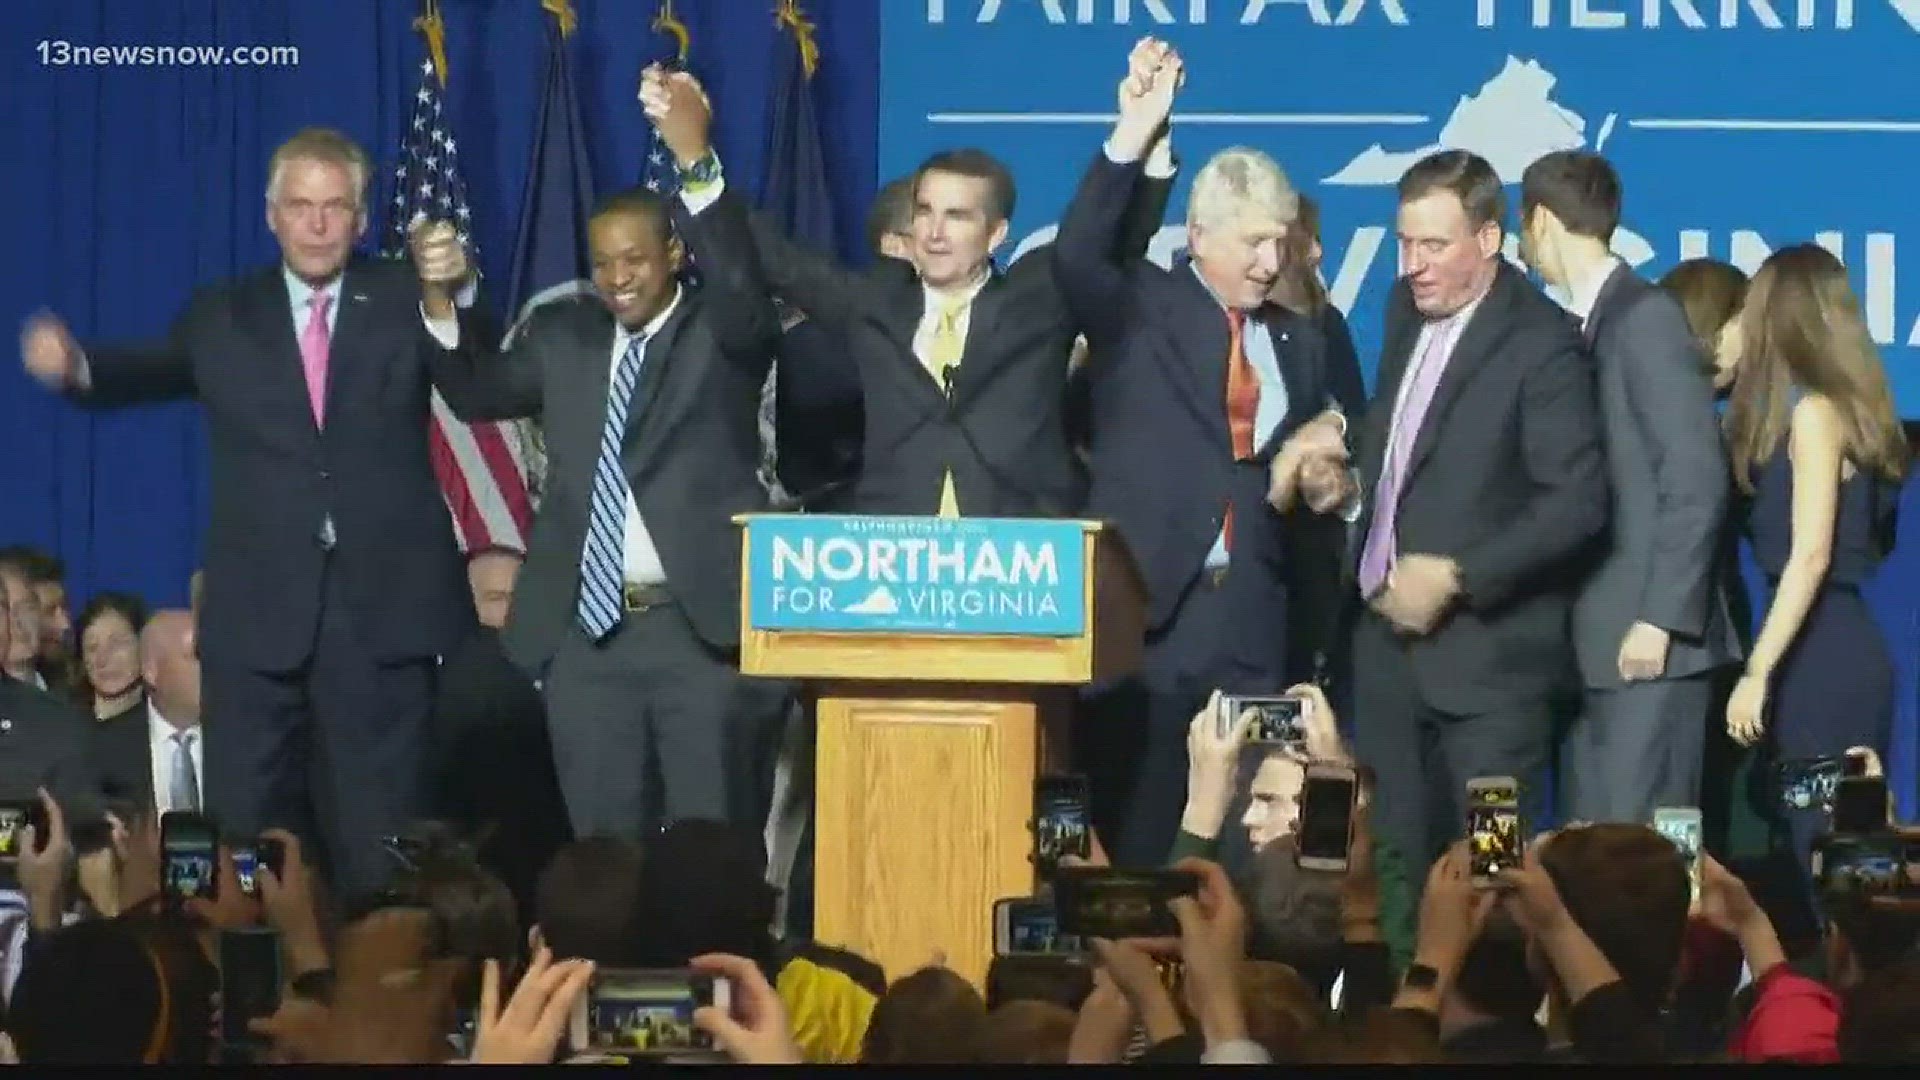 Ralph Northam was announced as governor elect Tuesday night